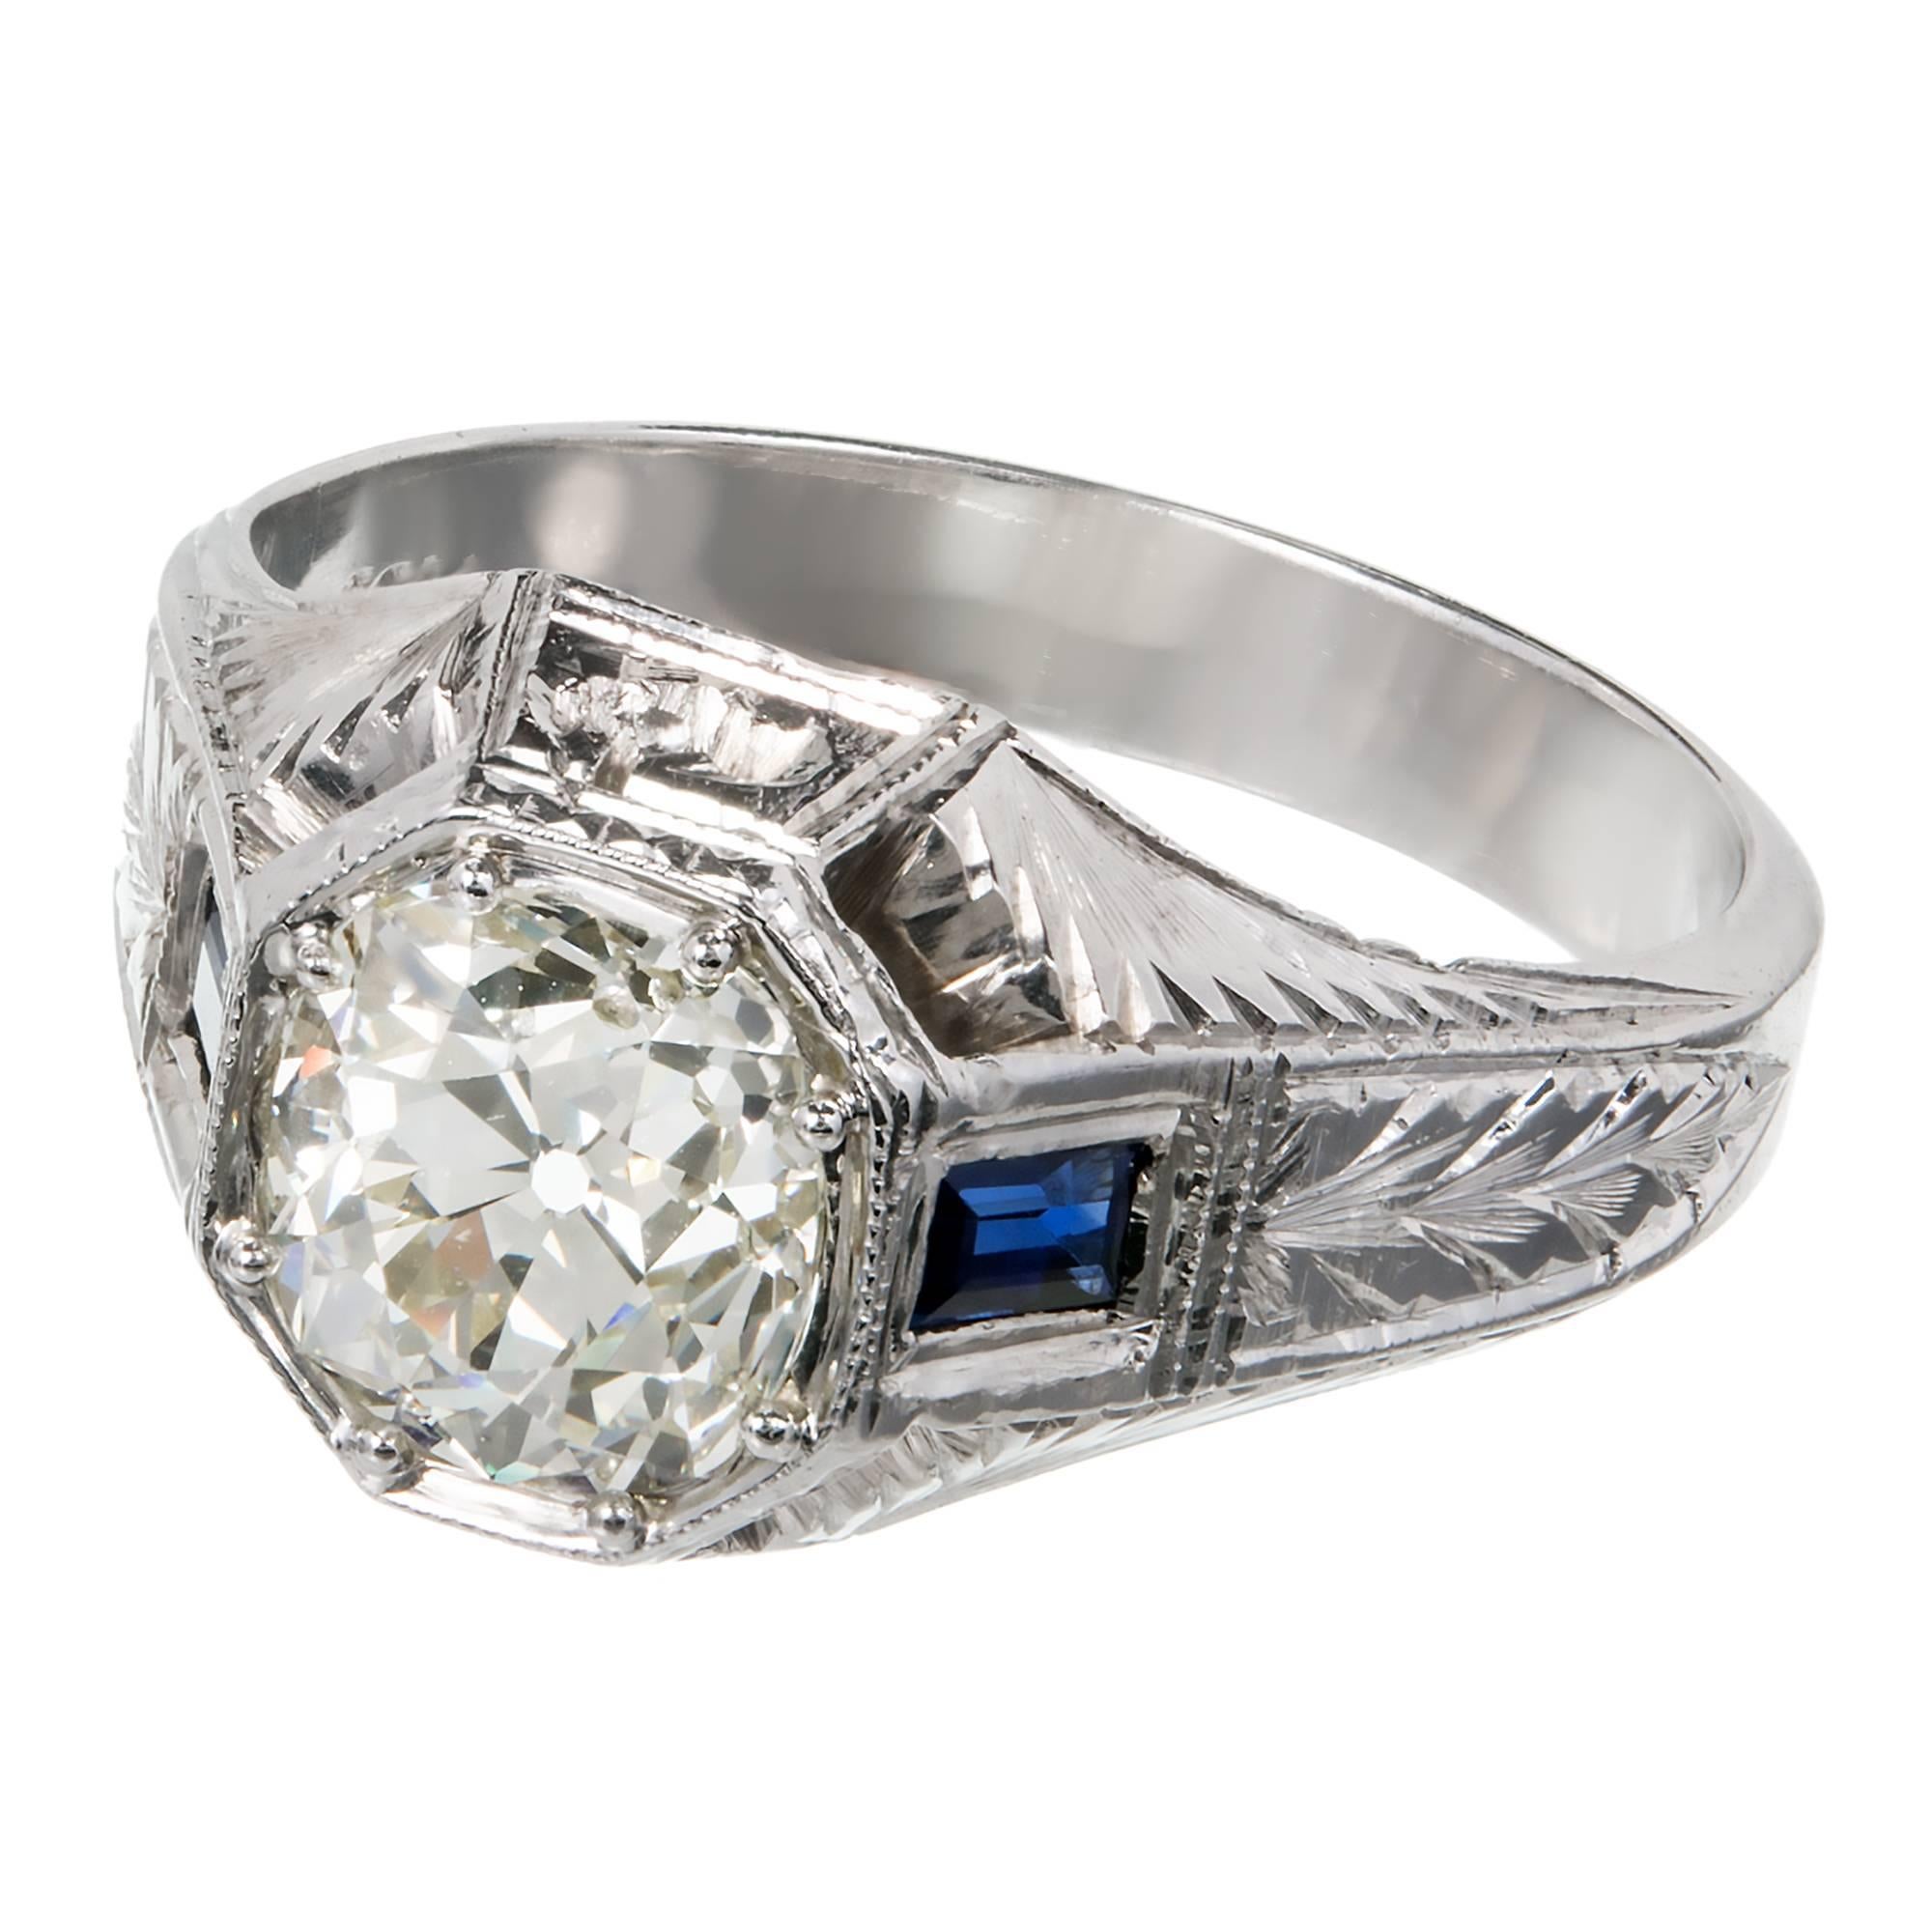 GIA certified raised crown diamond men's ring in a 20k white gold setting with sapphire accents. Circa 1920-1930. The sides are cut out allow light for diamond to sparkle. Hand engraved shank. 

1 Old Mine Brilliant Diamond 1.92 cts 54% table 78.2%